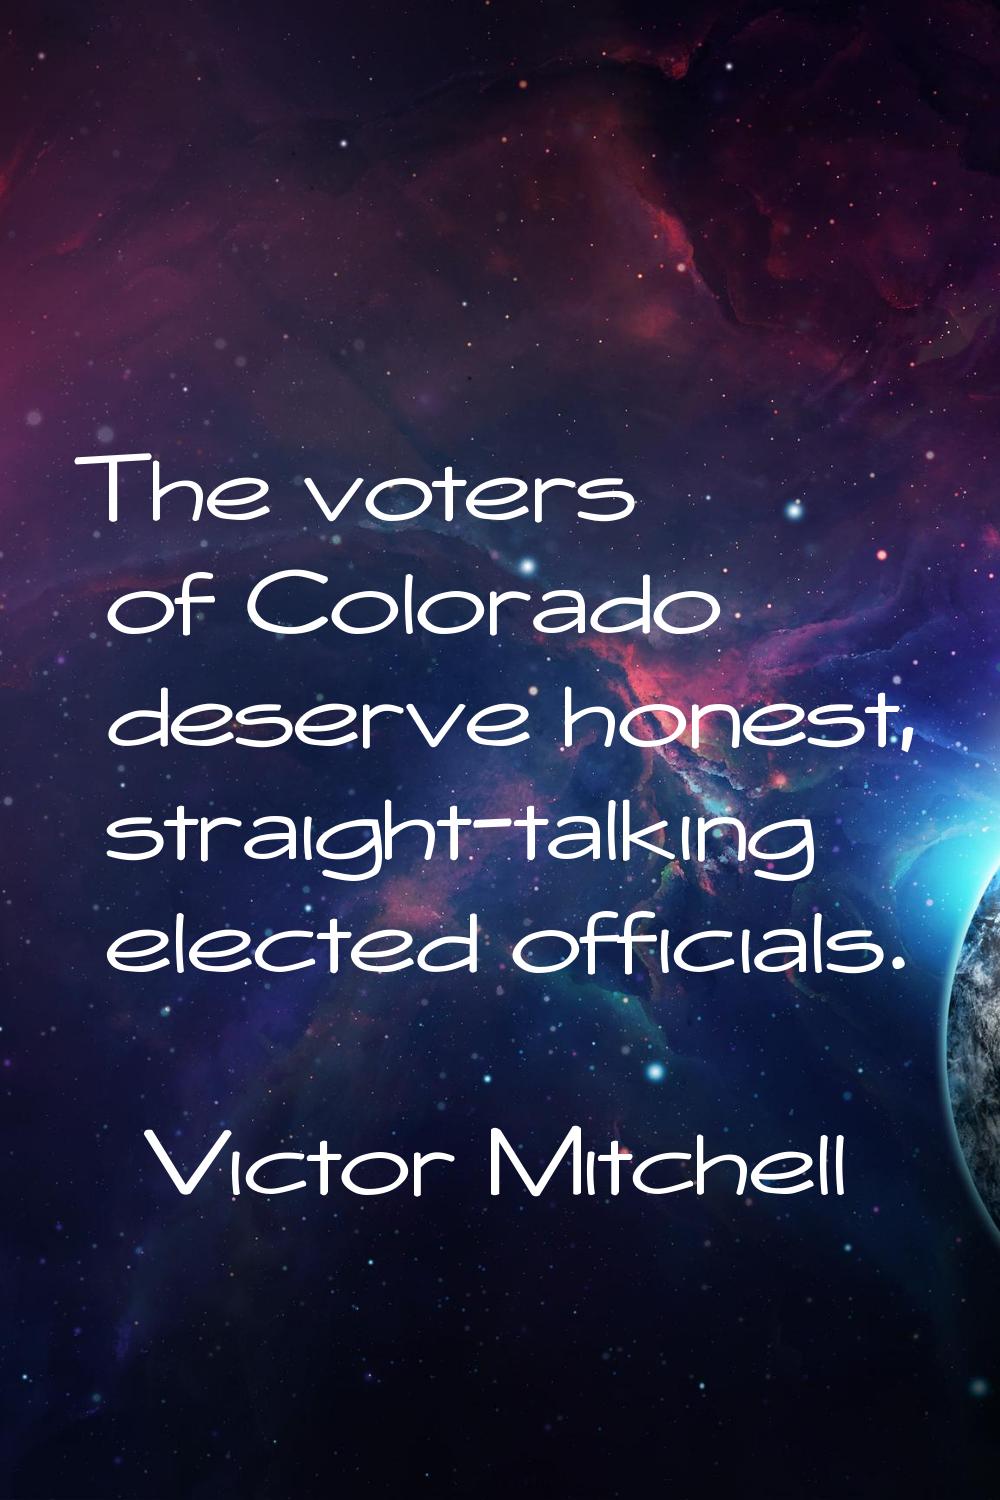 The voters of Colorado deserve honest, straight-talking elected officials.